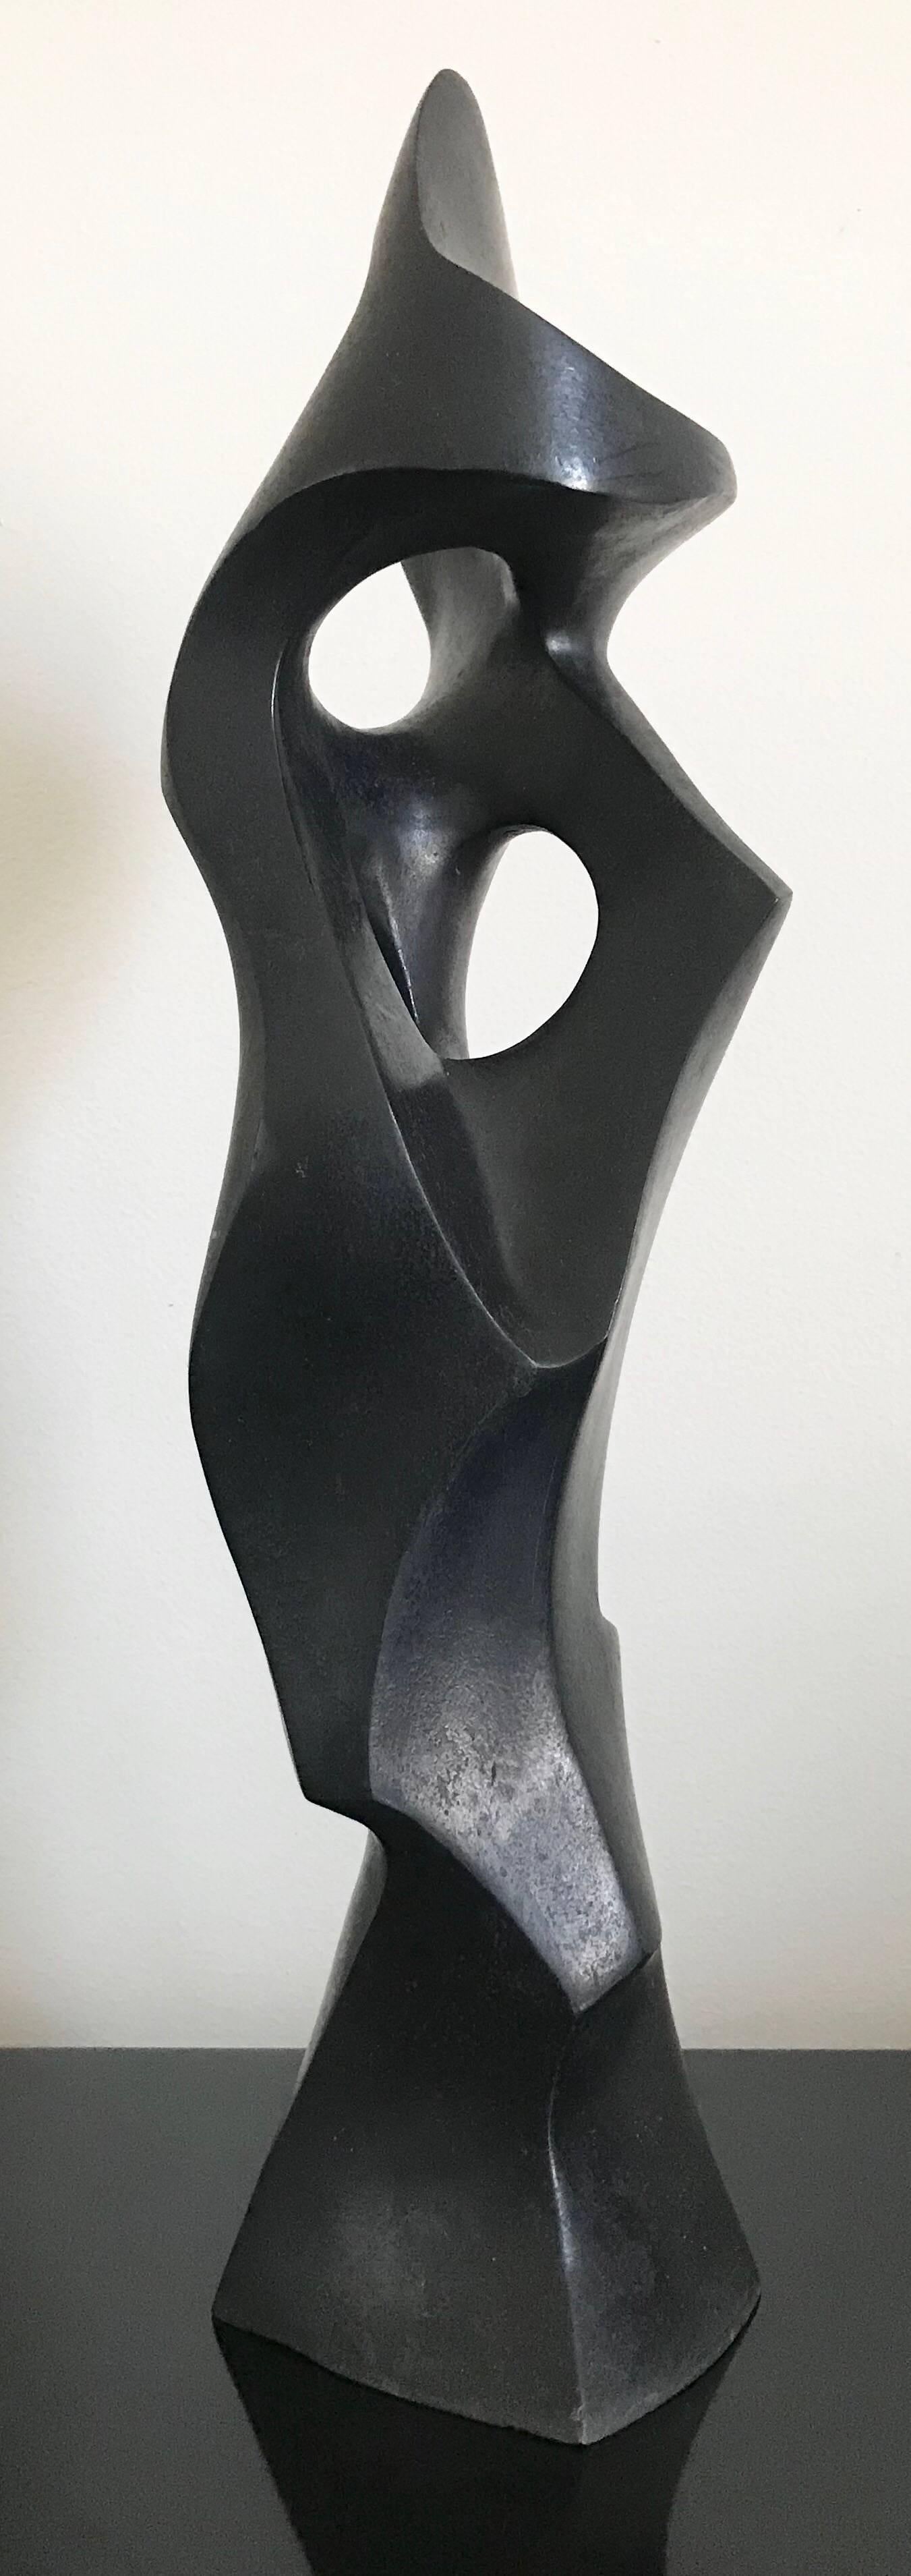 Abstract bronze sculpture by Seymour Meyer, signed and numbered 1/9


Seymour Meyer (Amer. 1914 - 2009). First a student of Louise Nevelson, Meyer became her protege, and then co-collaborator. His biomorphic sculptures were widely exhibited, and